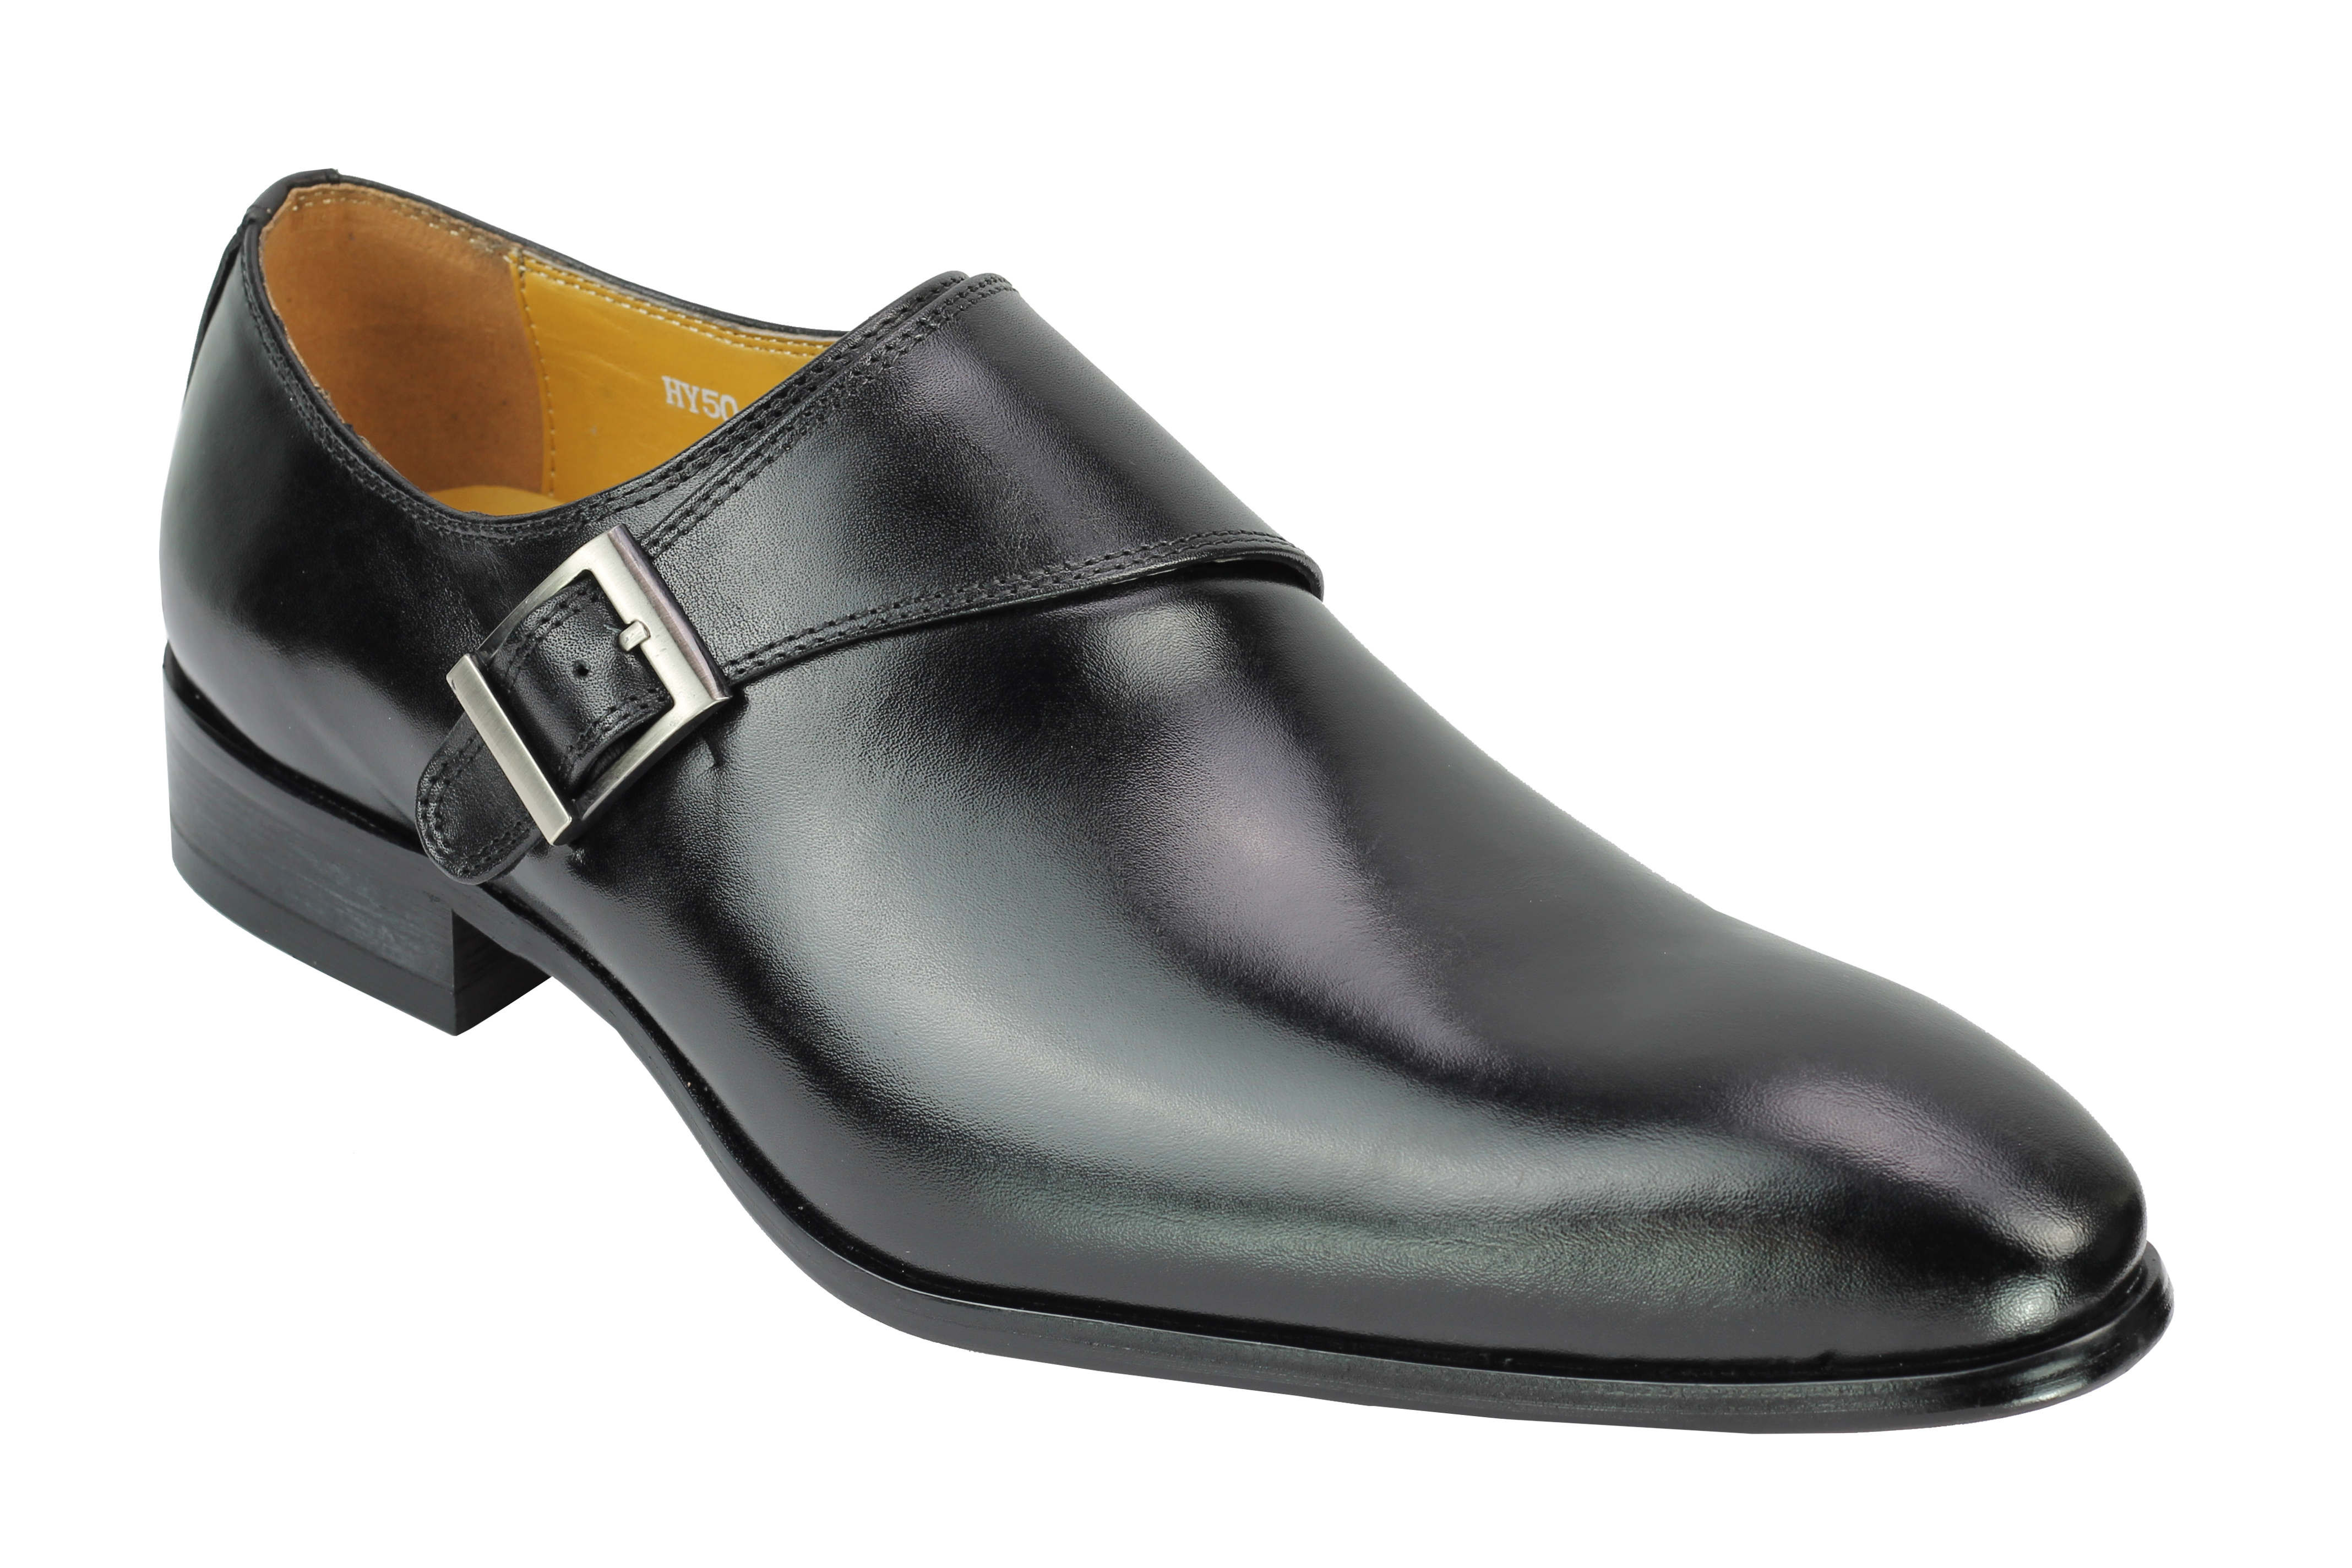 Real Leather Buckle Strap Slip Loafers Black